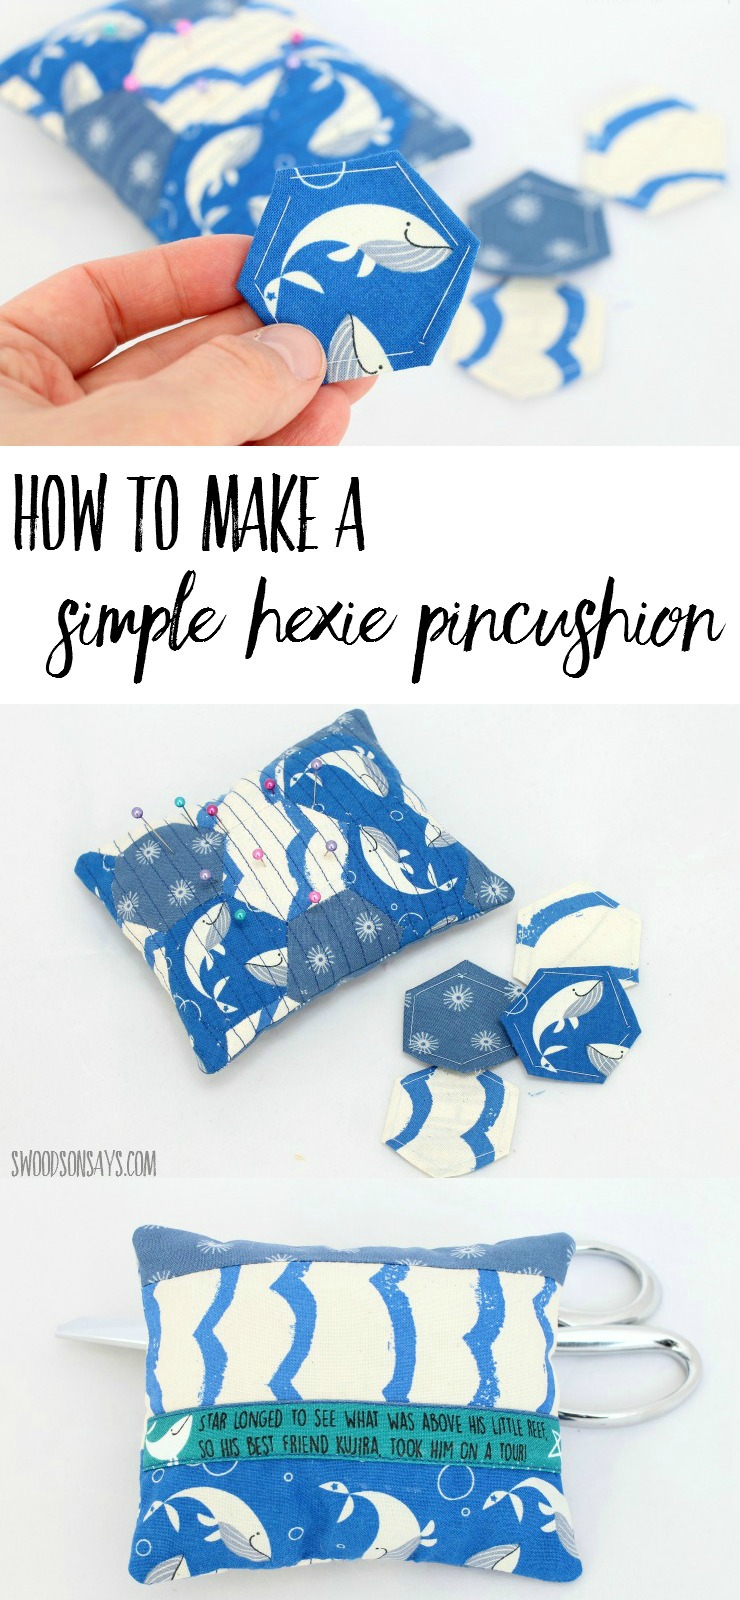 Interested in EPP (english paper piecing) but intimidated by making a whole quilt? With only 17 hexies, make a simple pincushion with this easy pincushion tutorial! This is a great first quilting project and scrap buster tutorial. The post was sponsored by Maker Mountain Fabrics, where you can find this adorable Cotton + Steel Kujira fabric!